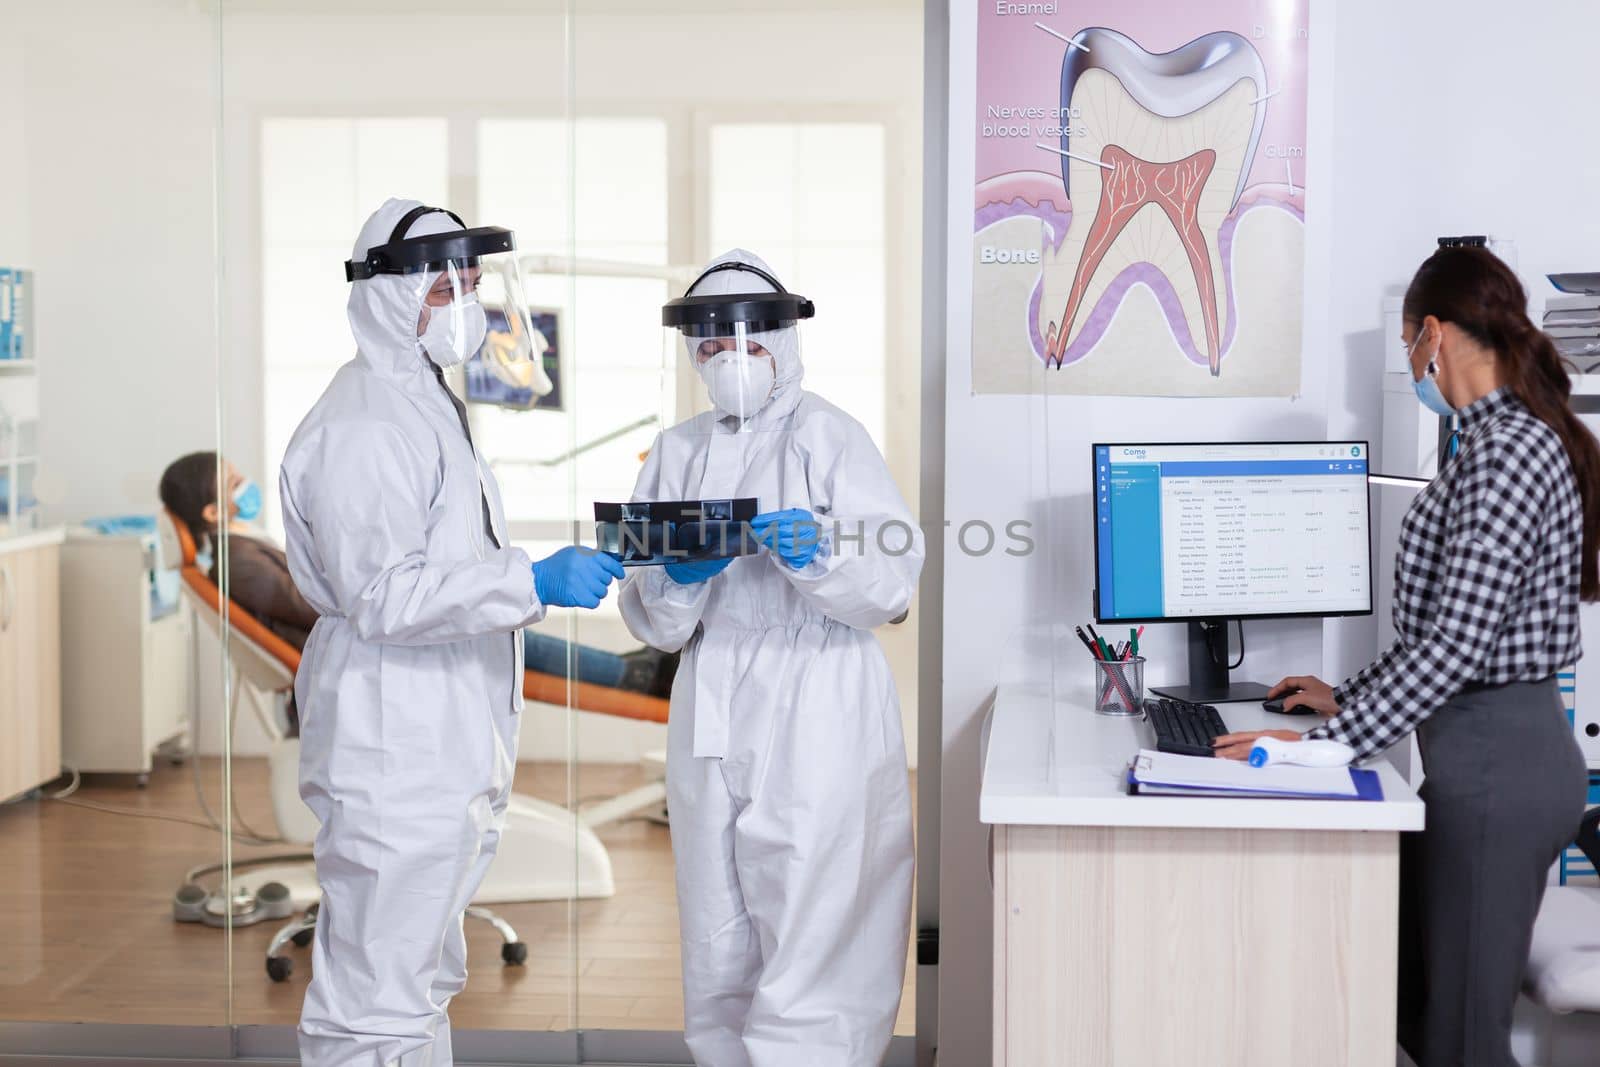 Stomatology team dressed up in ppe suit during global pandemic by DCStudio